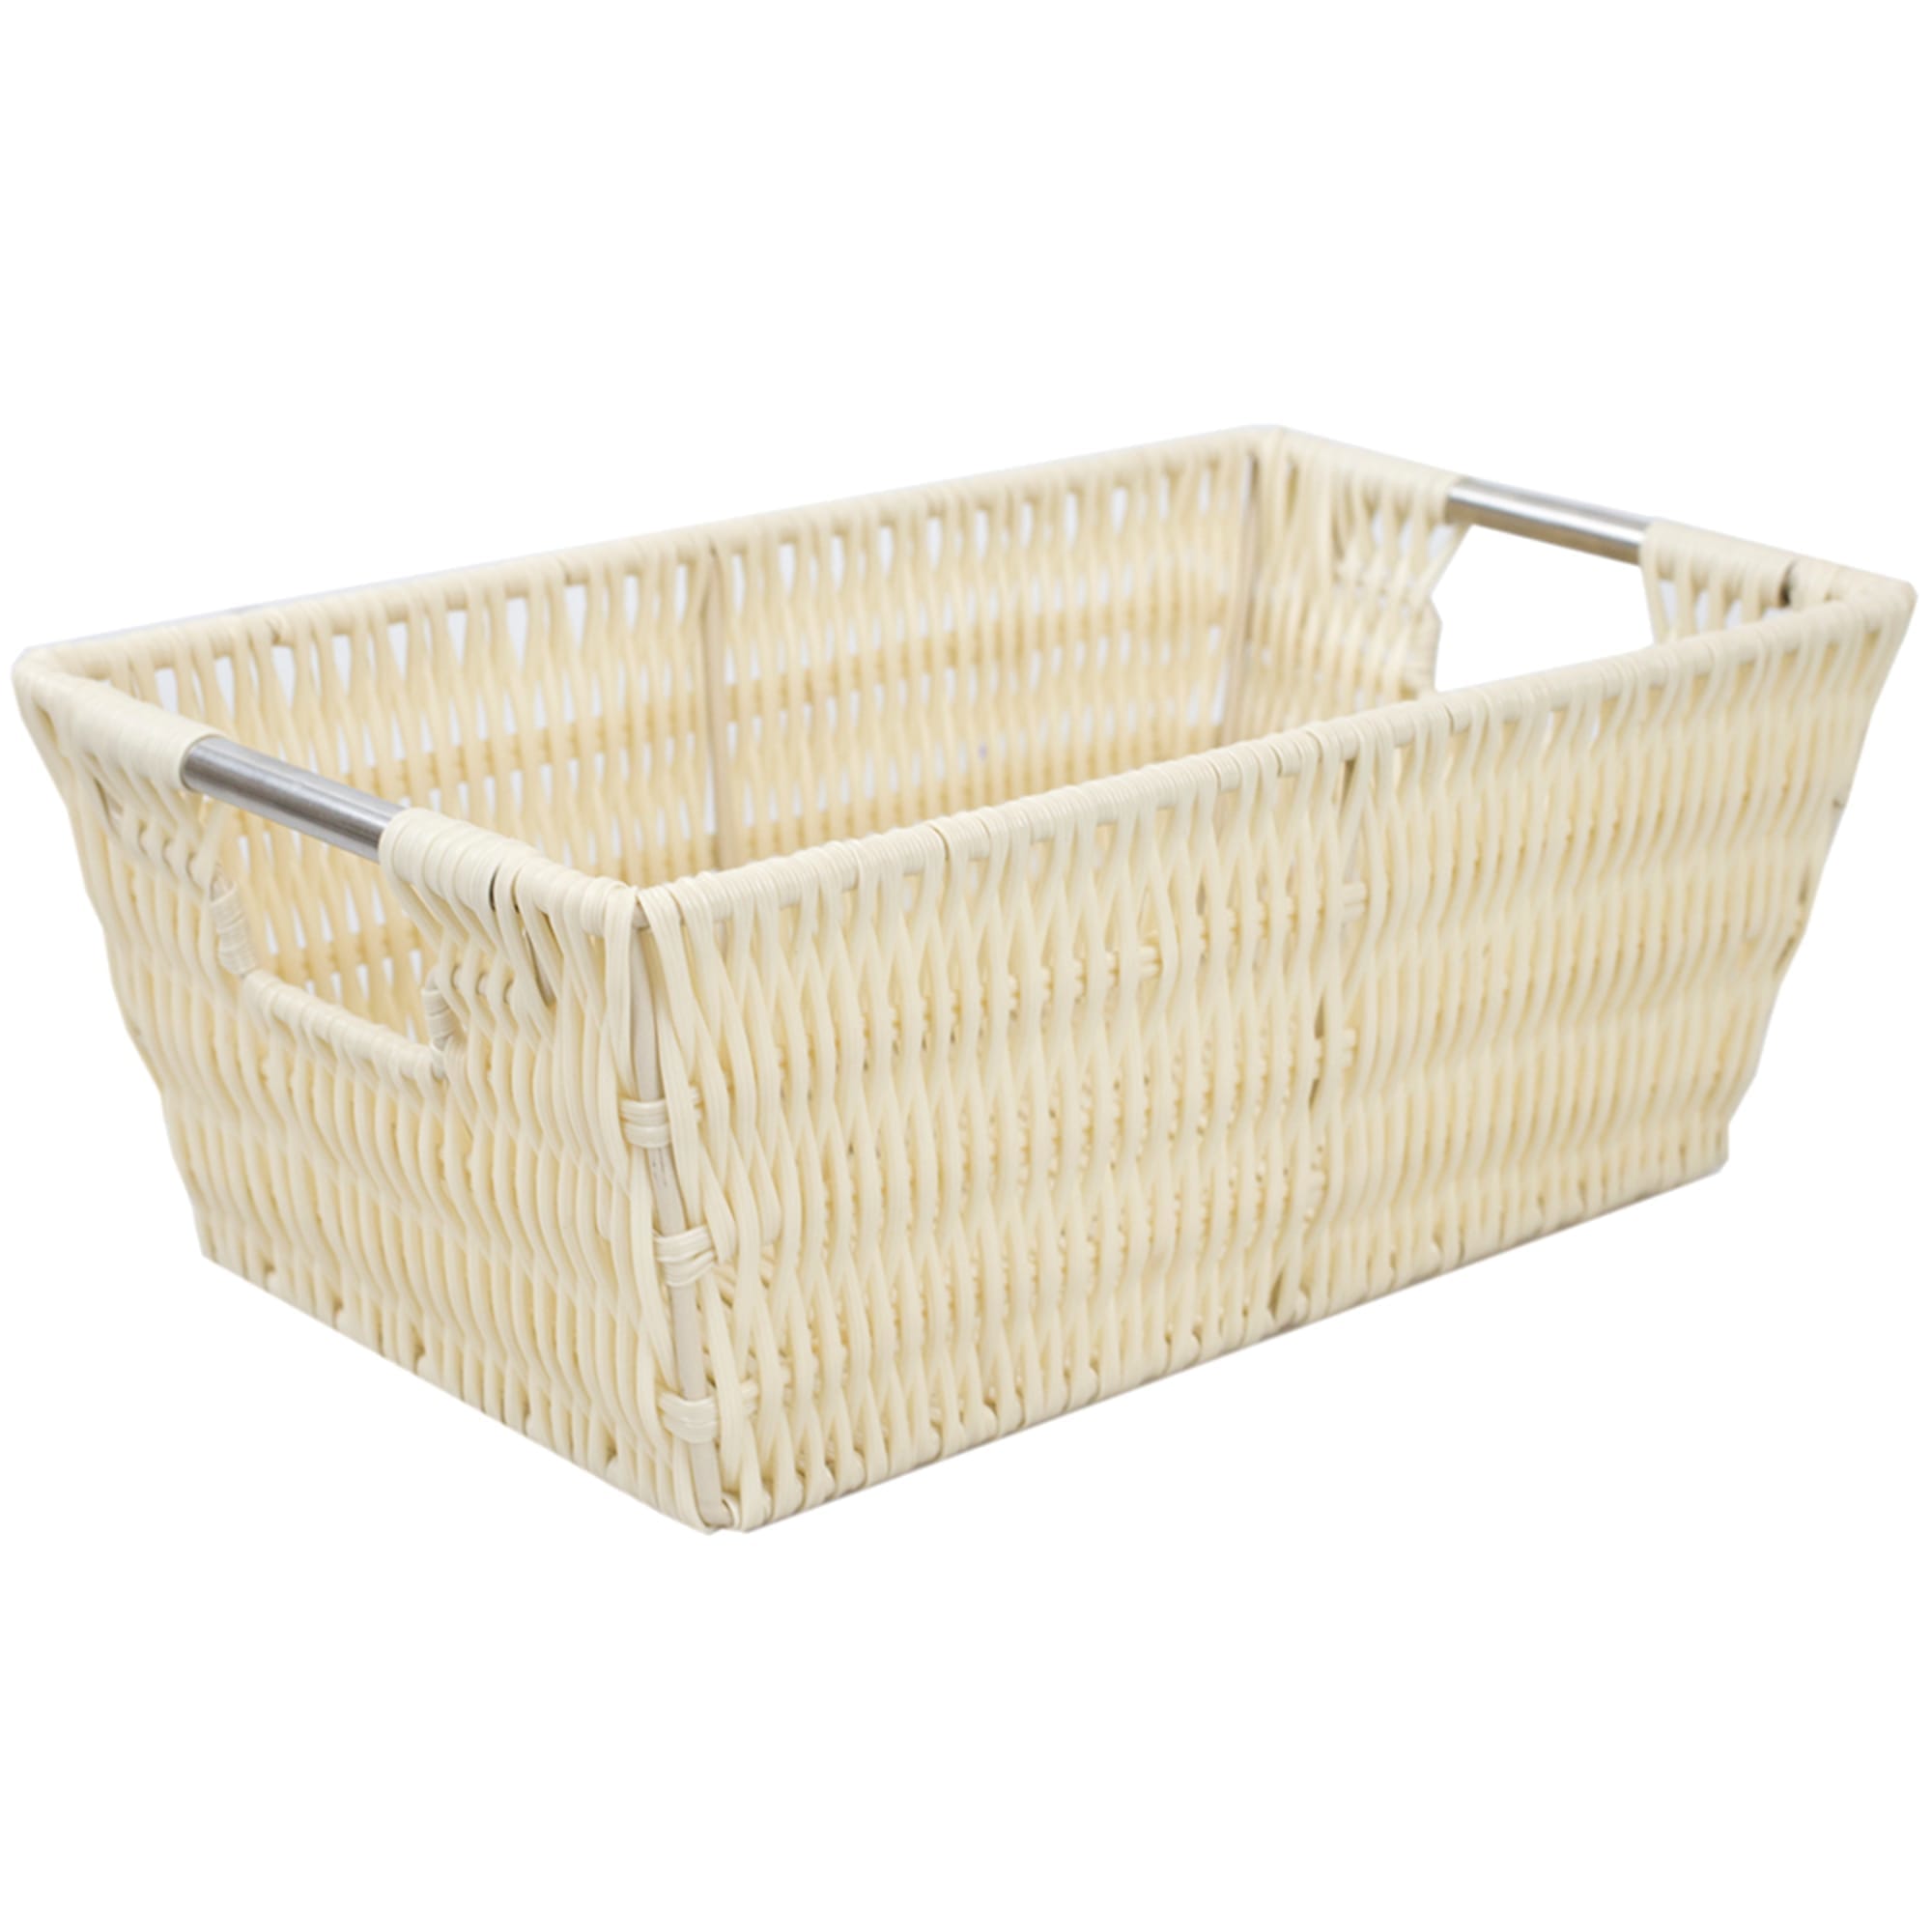 Home Basics Small  Intricate Decorative Weave Plastic Basket, Ivory $5.00 EACH, CASE PACK OF 6